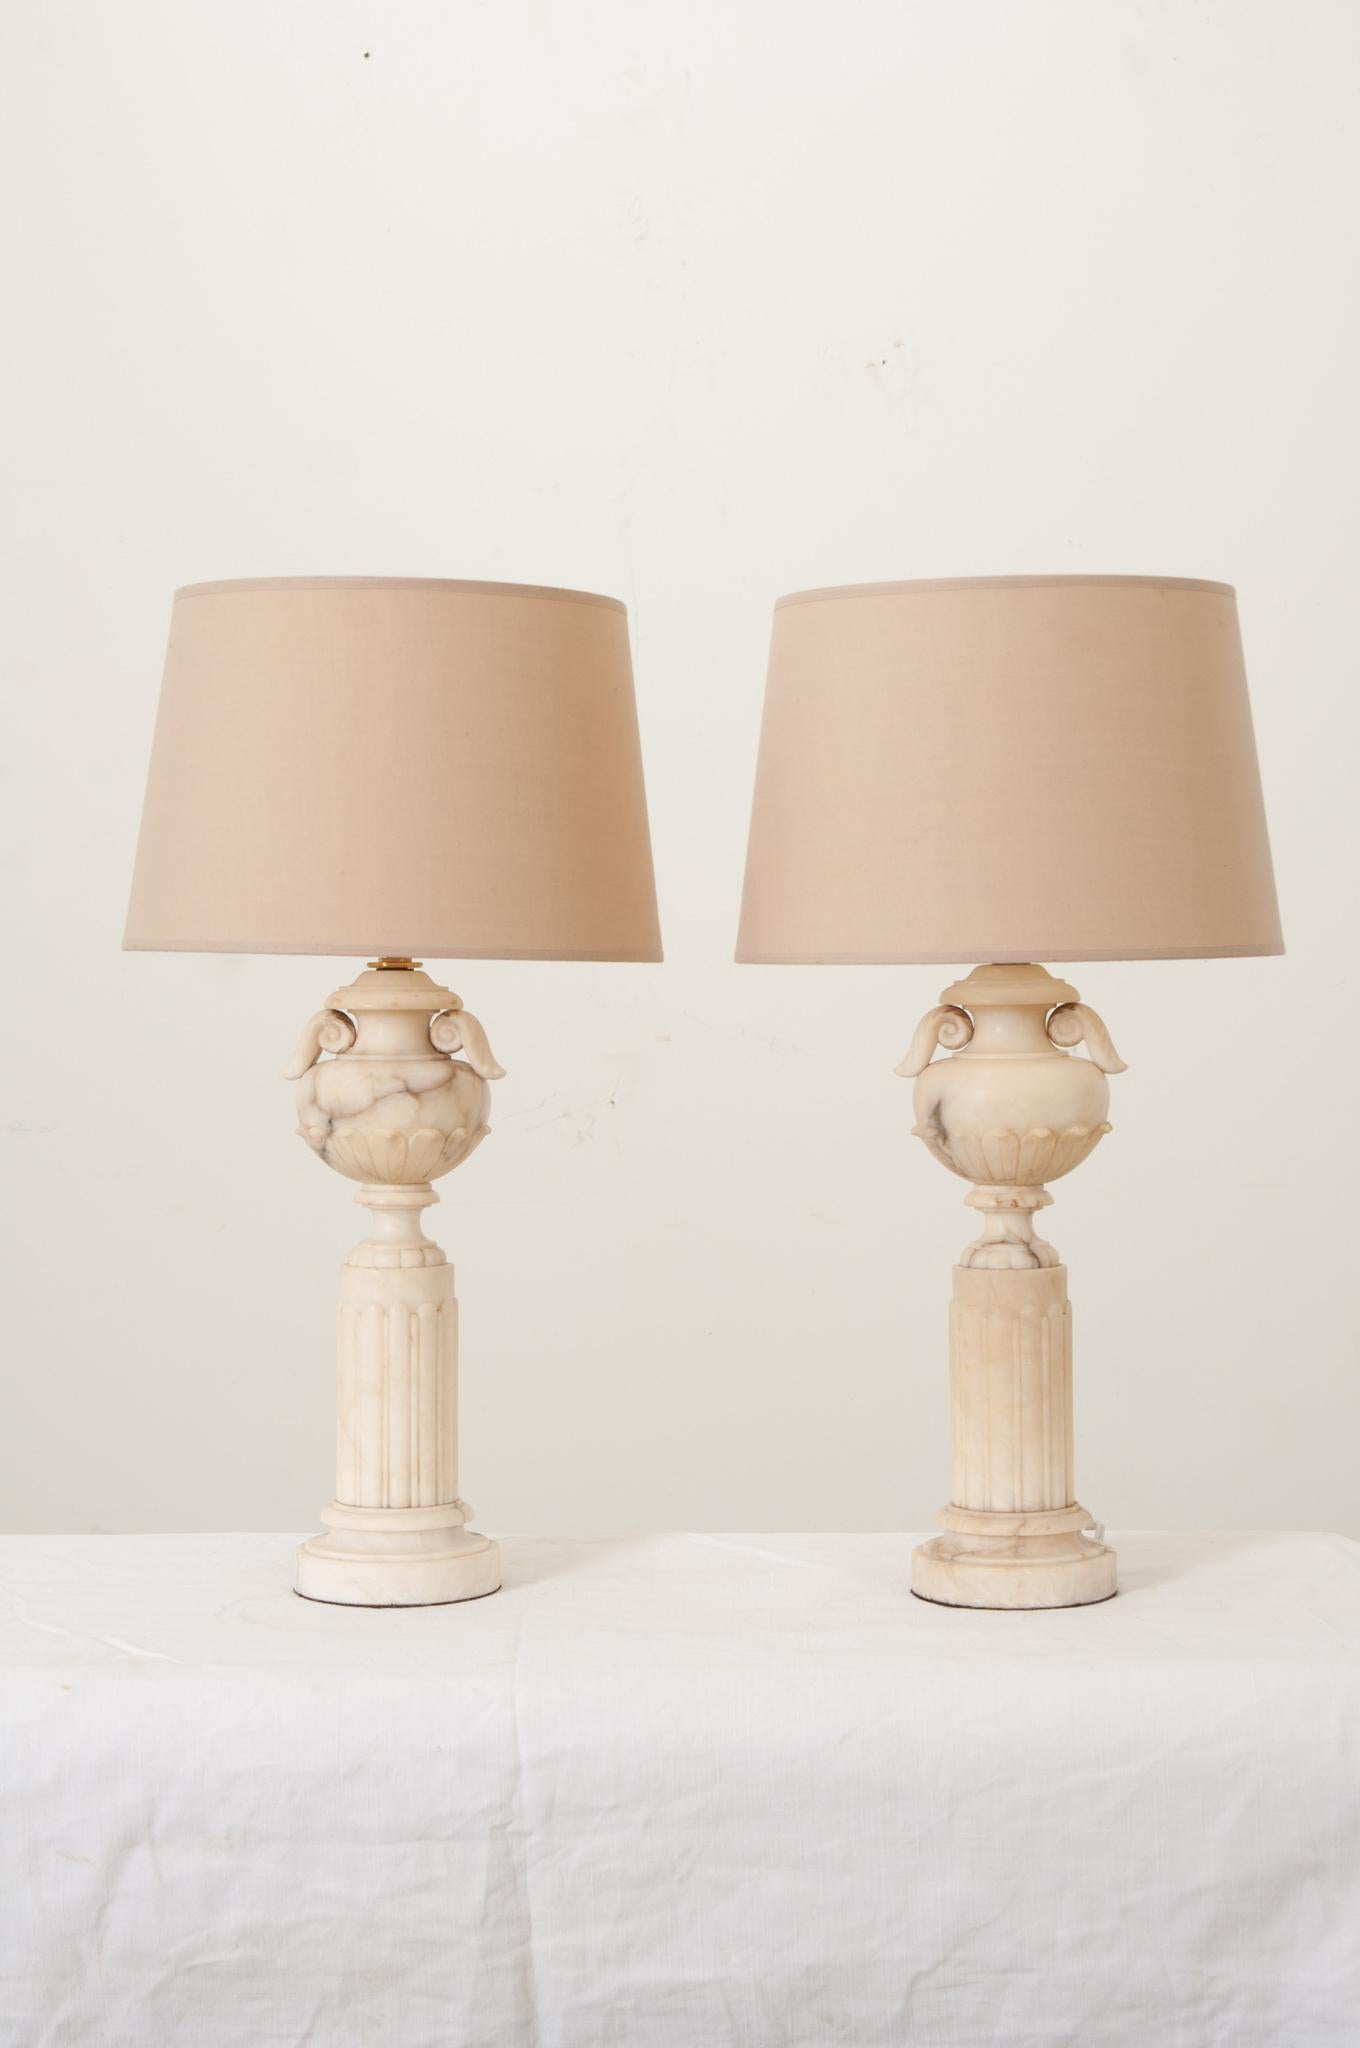 A French pair of carved white marble column lamps with urns. Elegant in style, with years of patina, these lamps can go in any interior. European mount shades complement this pair of table lamps. Cleaned and rewired for US electrical, ready for your